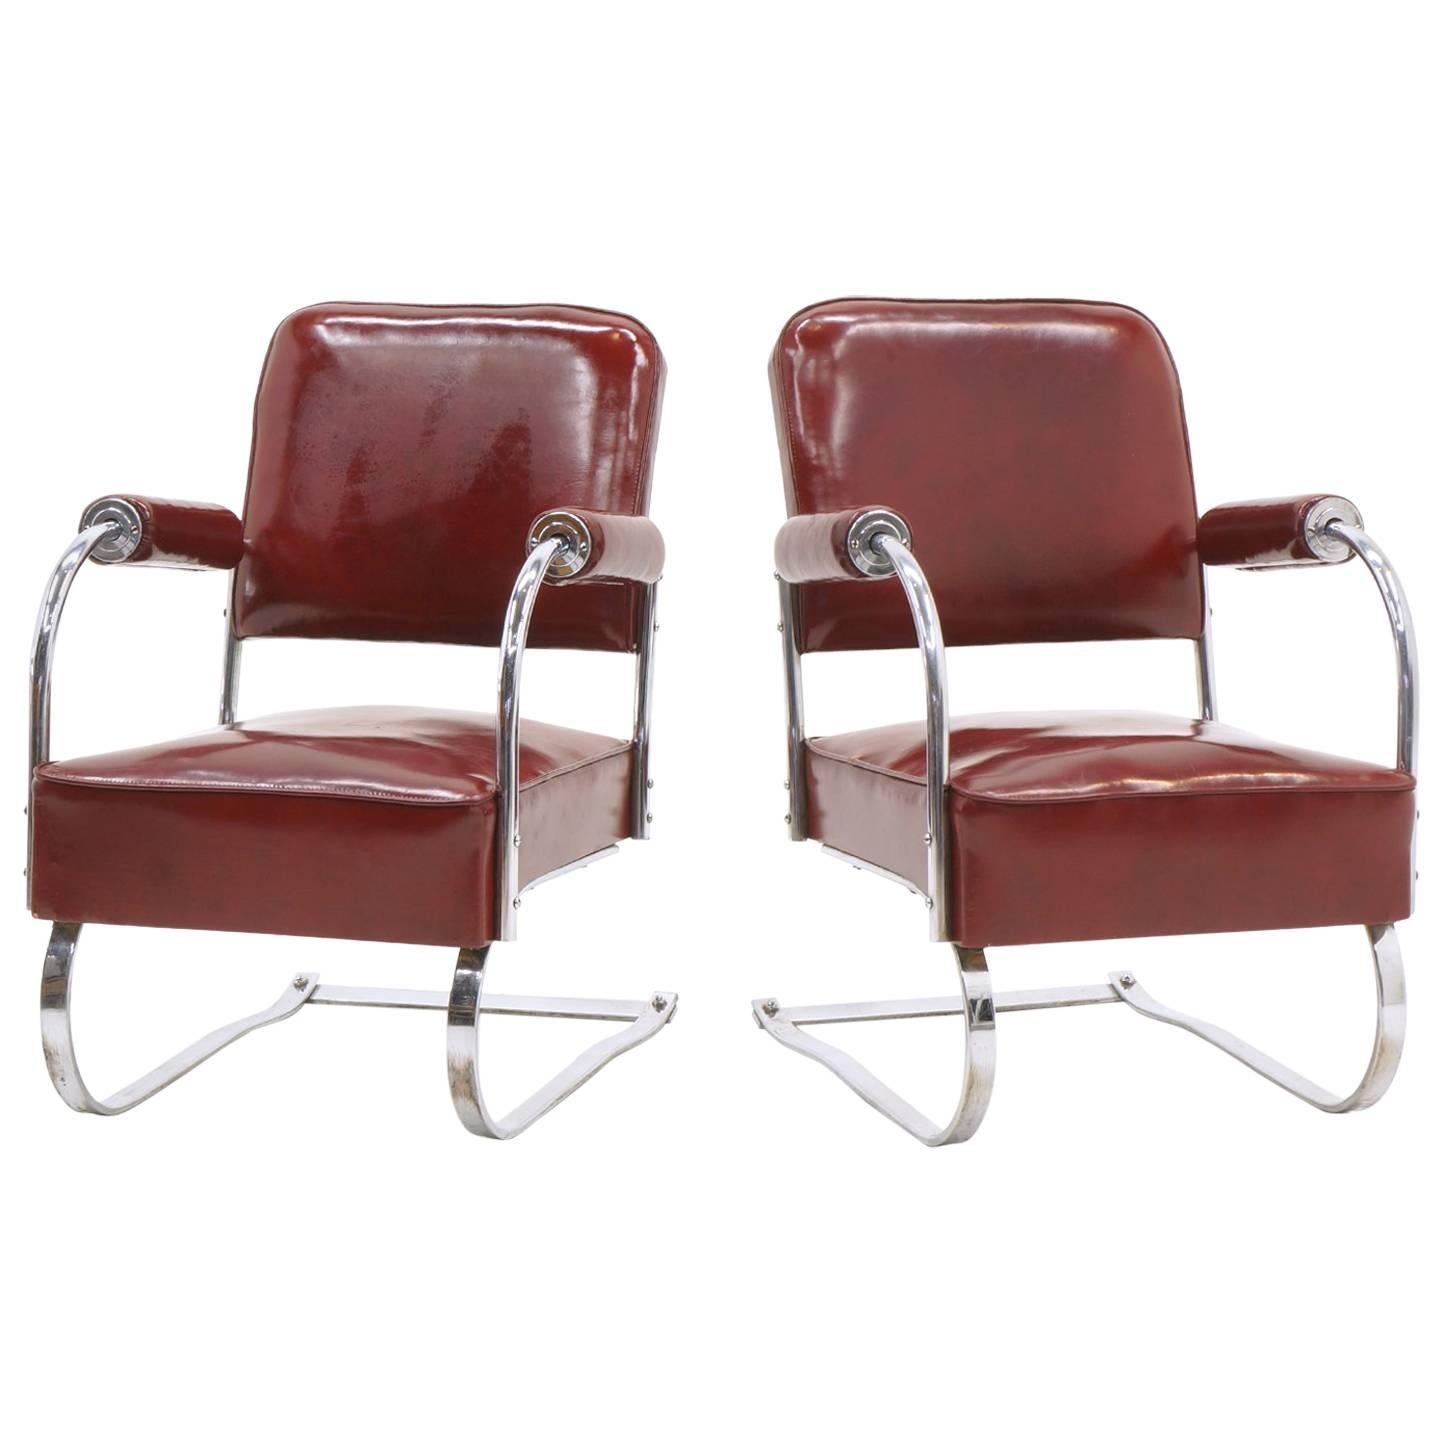 Pair of Lounge Chairs by KEM Weber for Lloyd, Amazing Original Condition